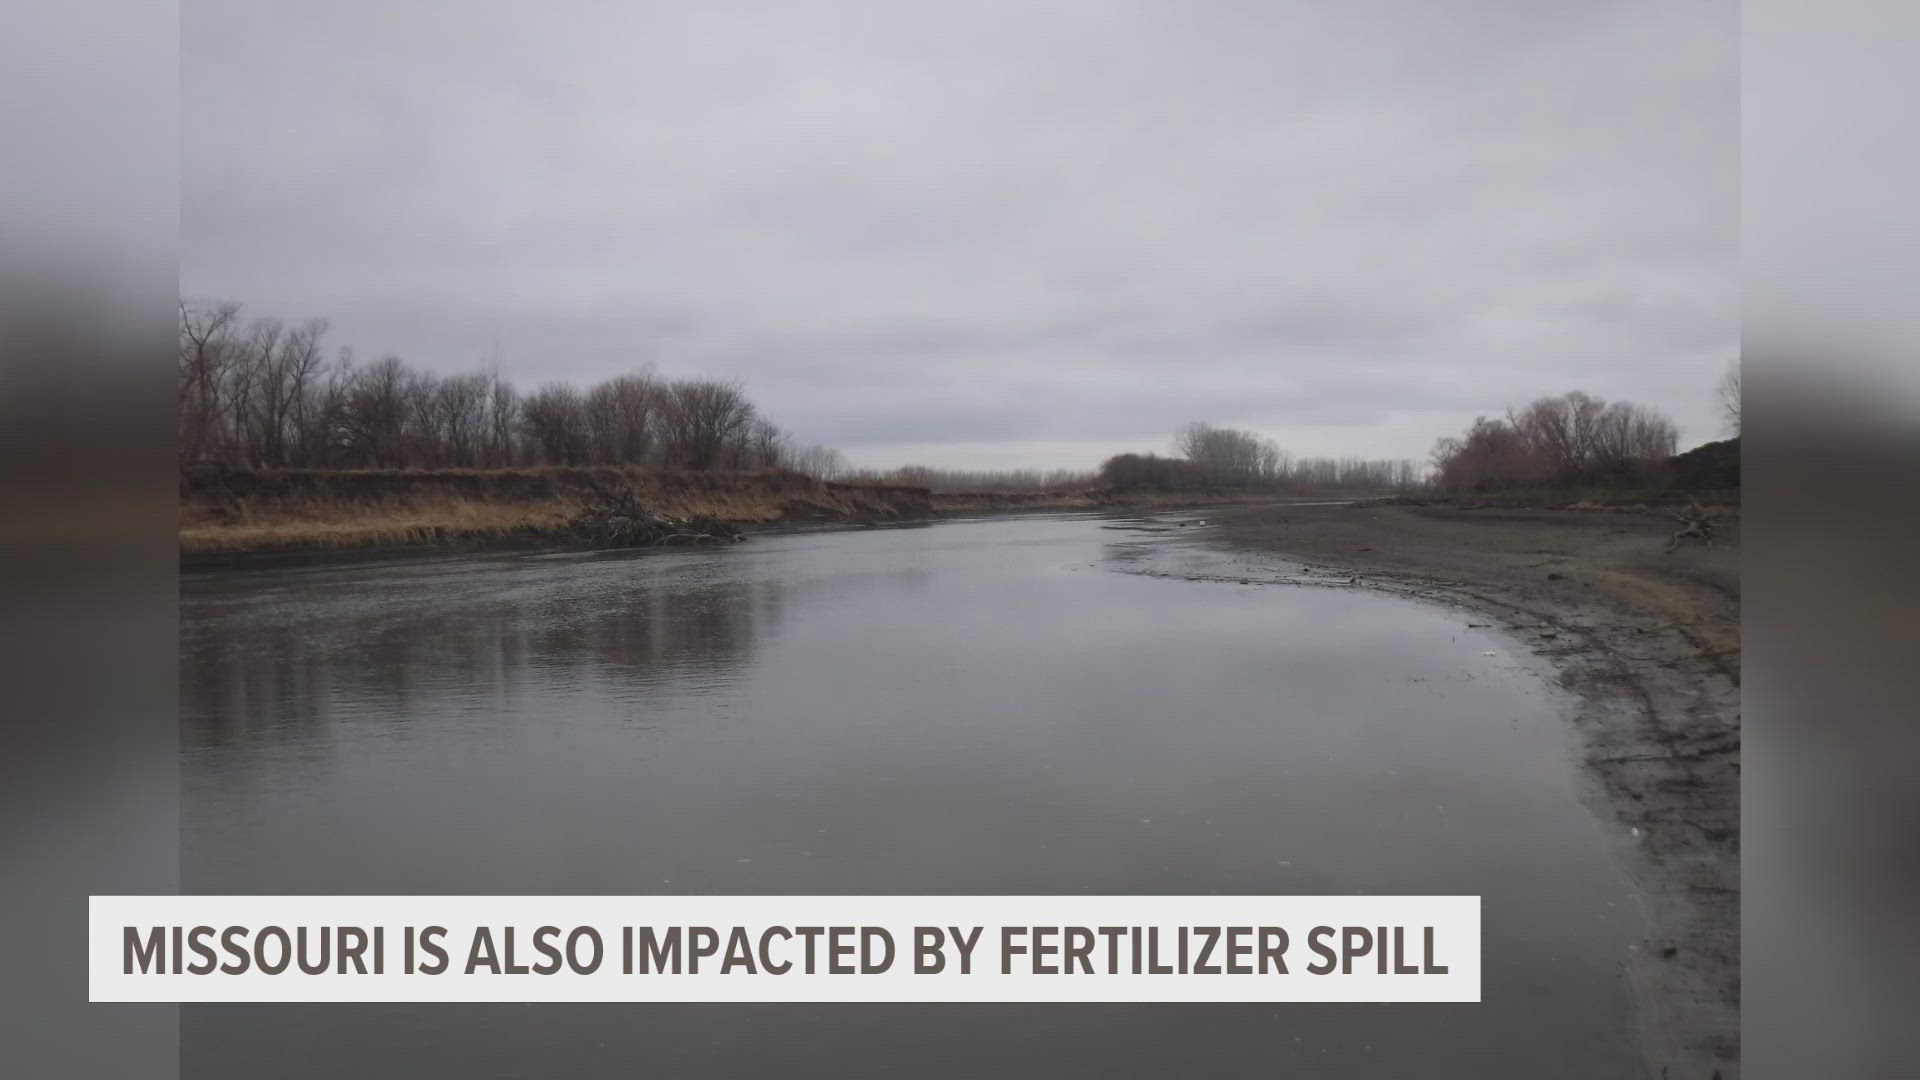 The Missouri Department of Natural Resources said their state's ammonia levels in water are higher due to a fertilizer spill into the Nishnabotna River.